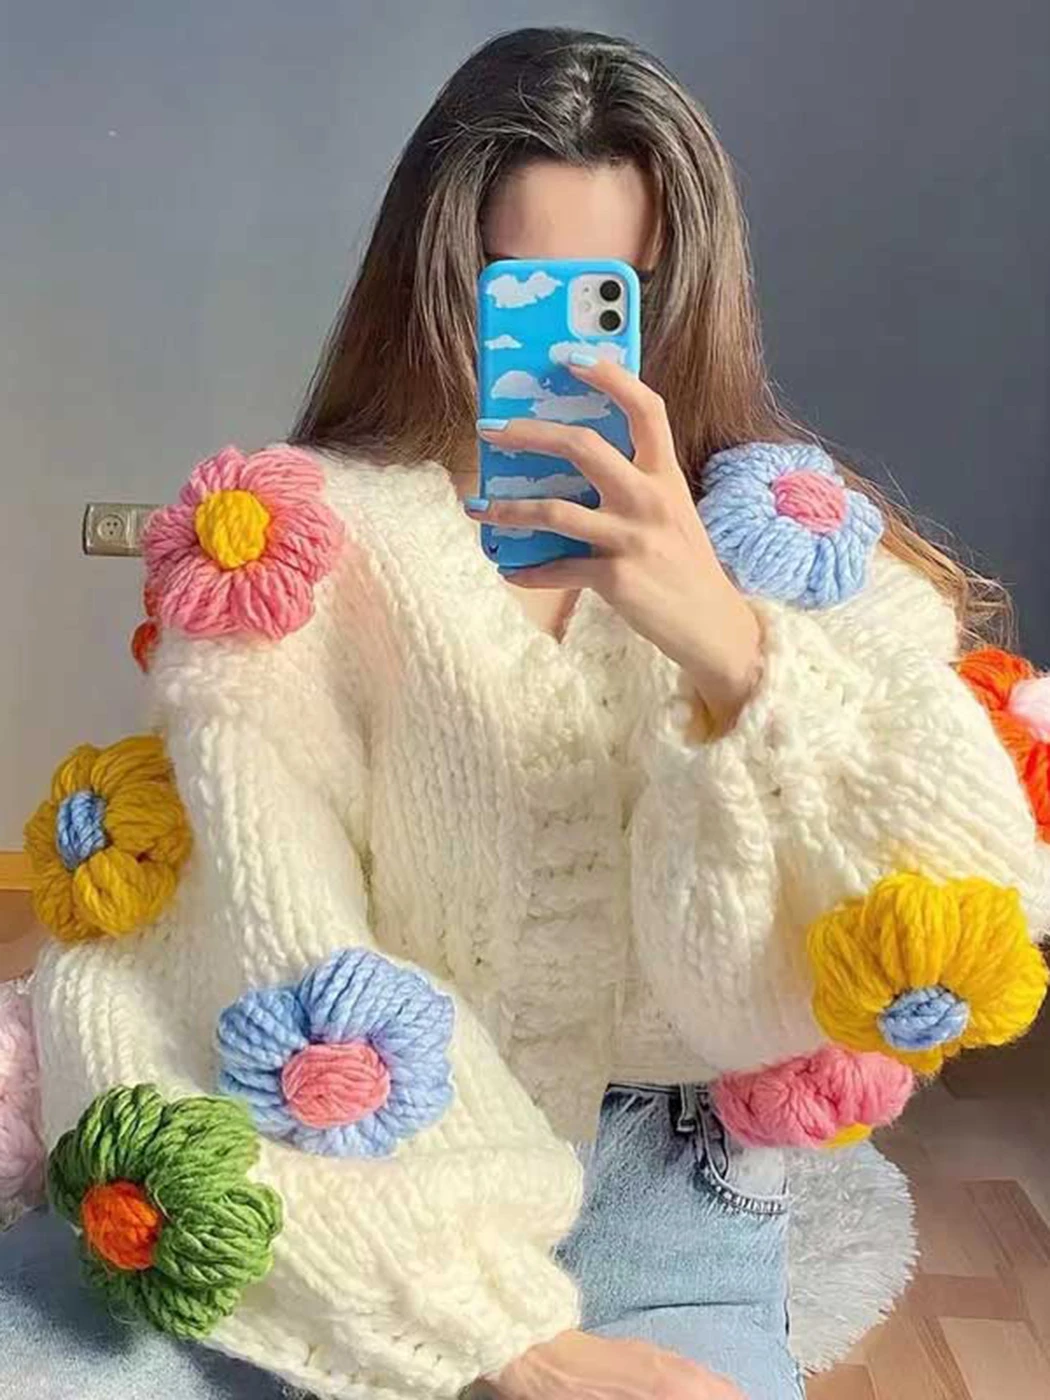 Jastie 2022 Winter Women's Cardigans Multicolor Floral Knitted Decoration Long Sleeve Loose Coats Warm Sweaters 3 Colors